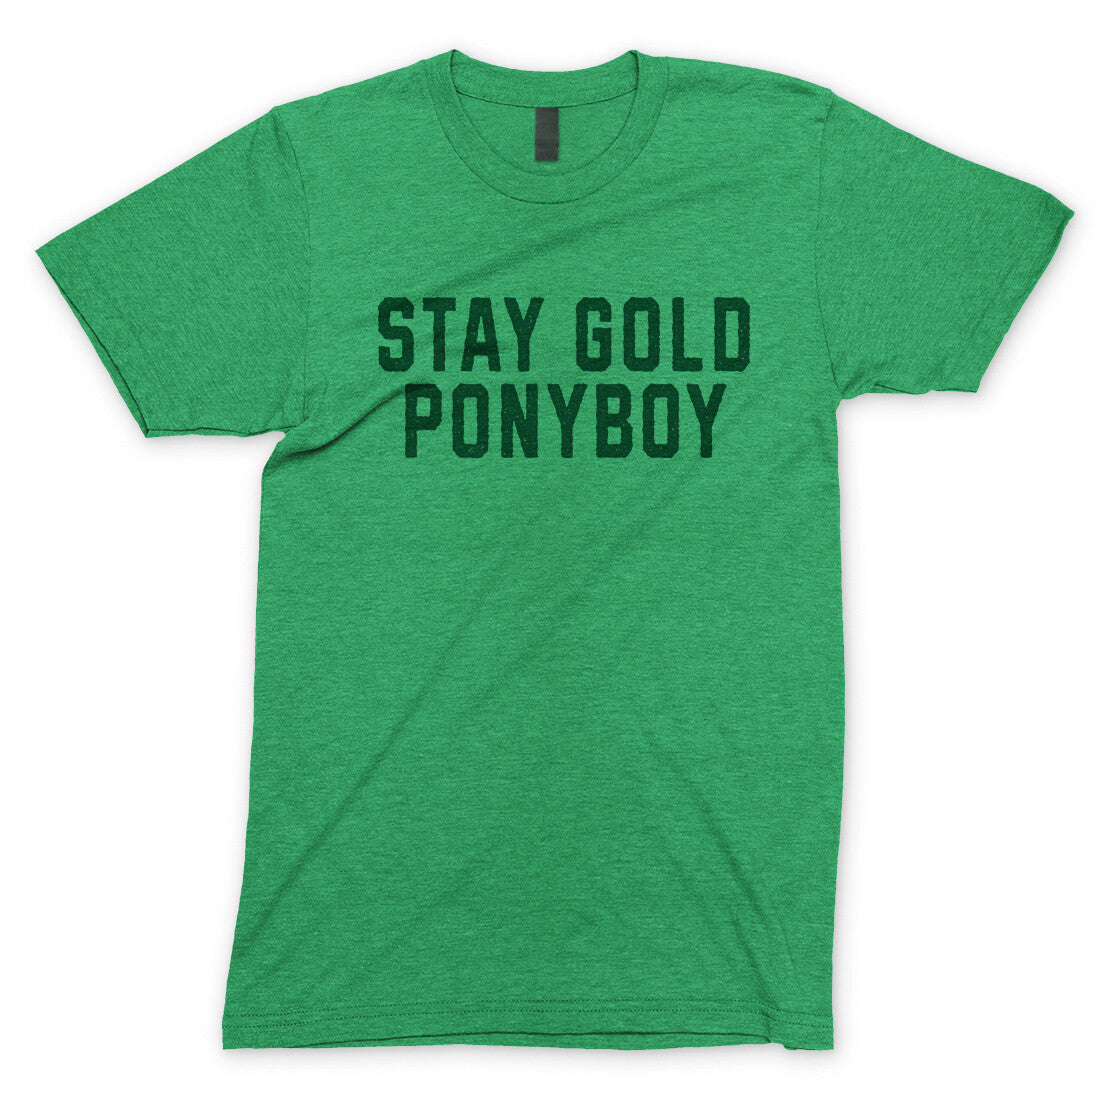 Stay Gold Ponyboy in Heather Irish Green Color